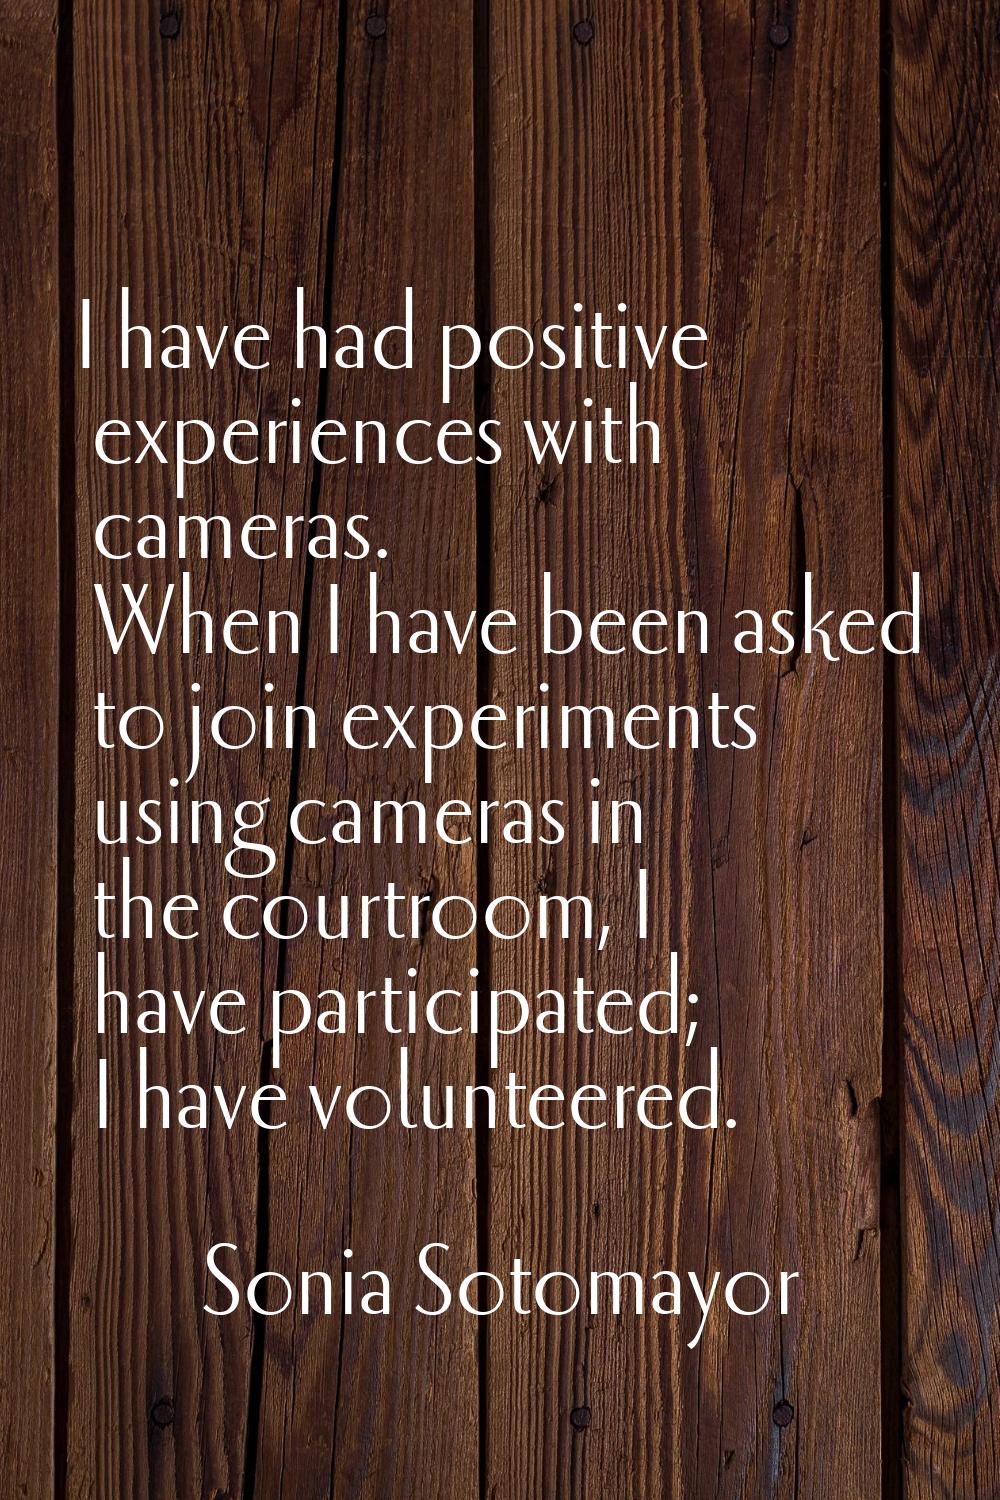 I have had positive experiences with cameras. When I have been asked to join experiments using came